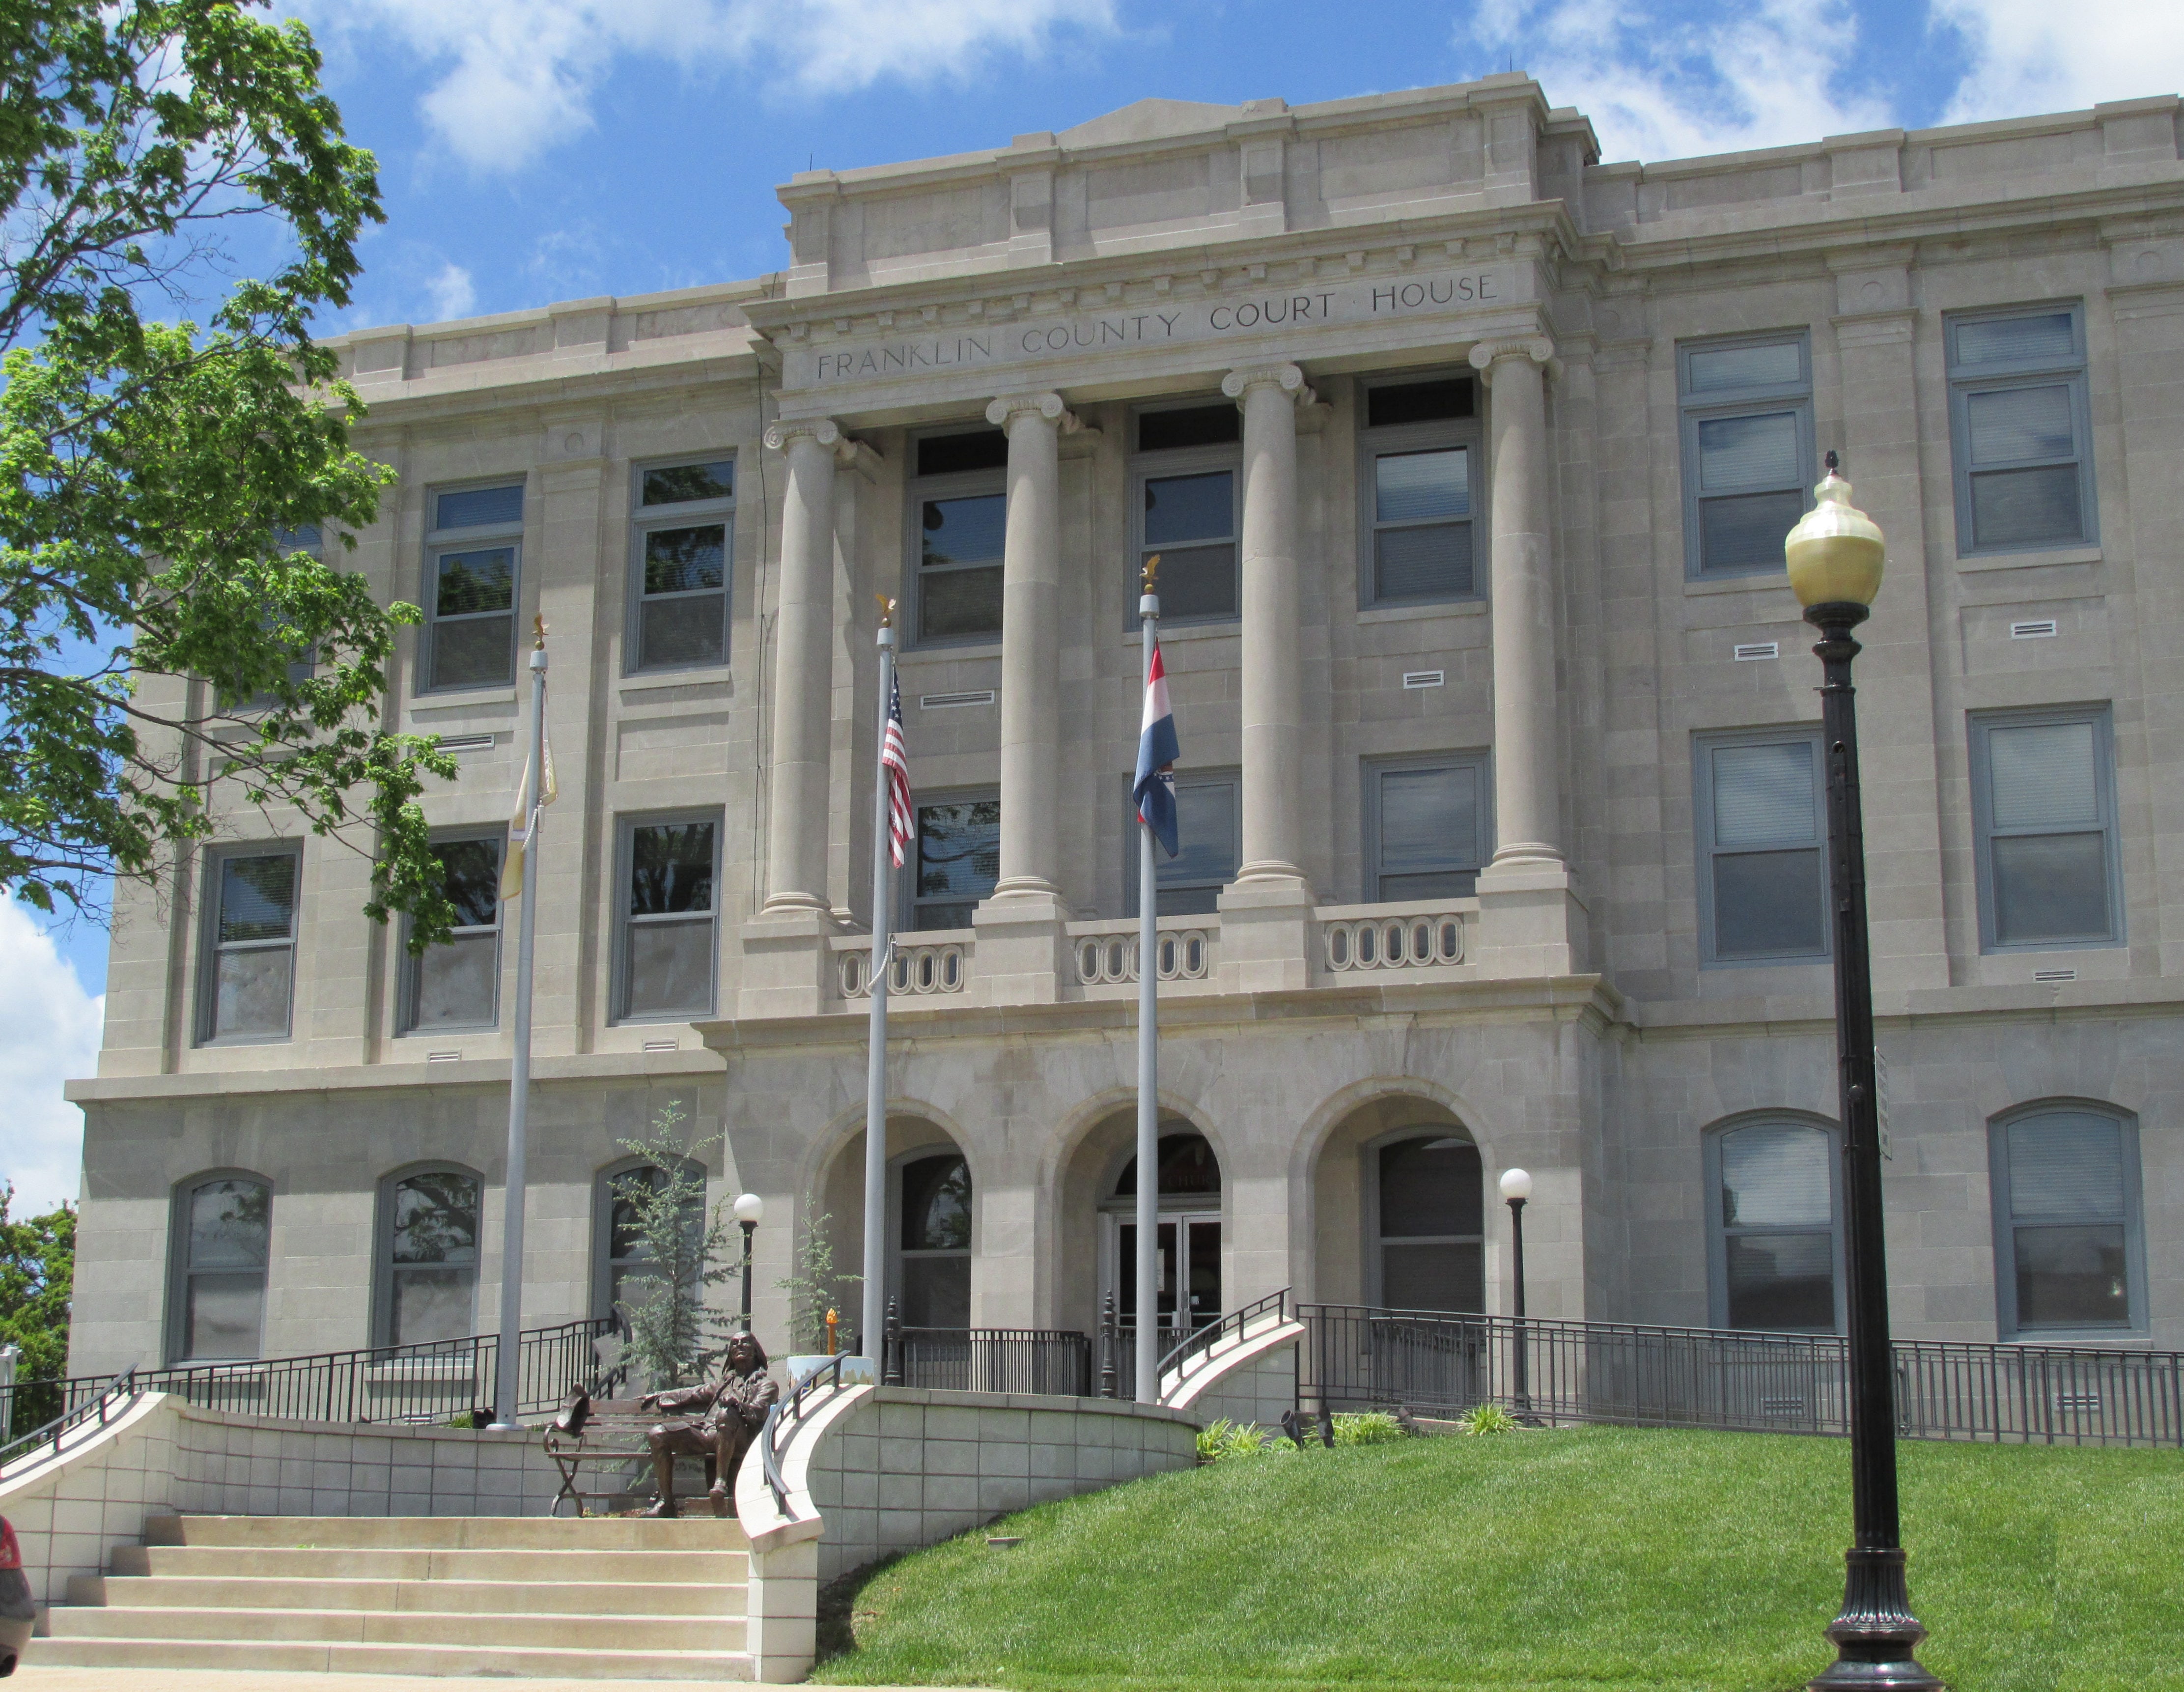 East entrance to Franklin County Historical Courthouse in Union, Missouri by Cochran Engineering and Architecture